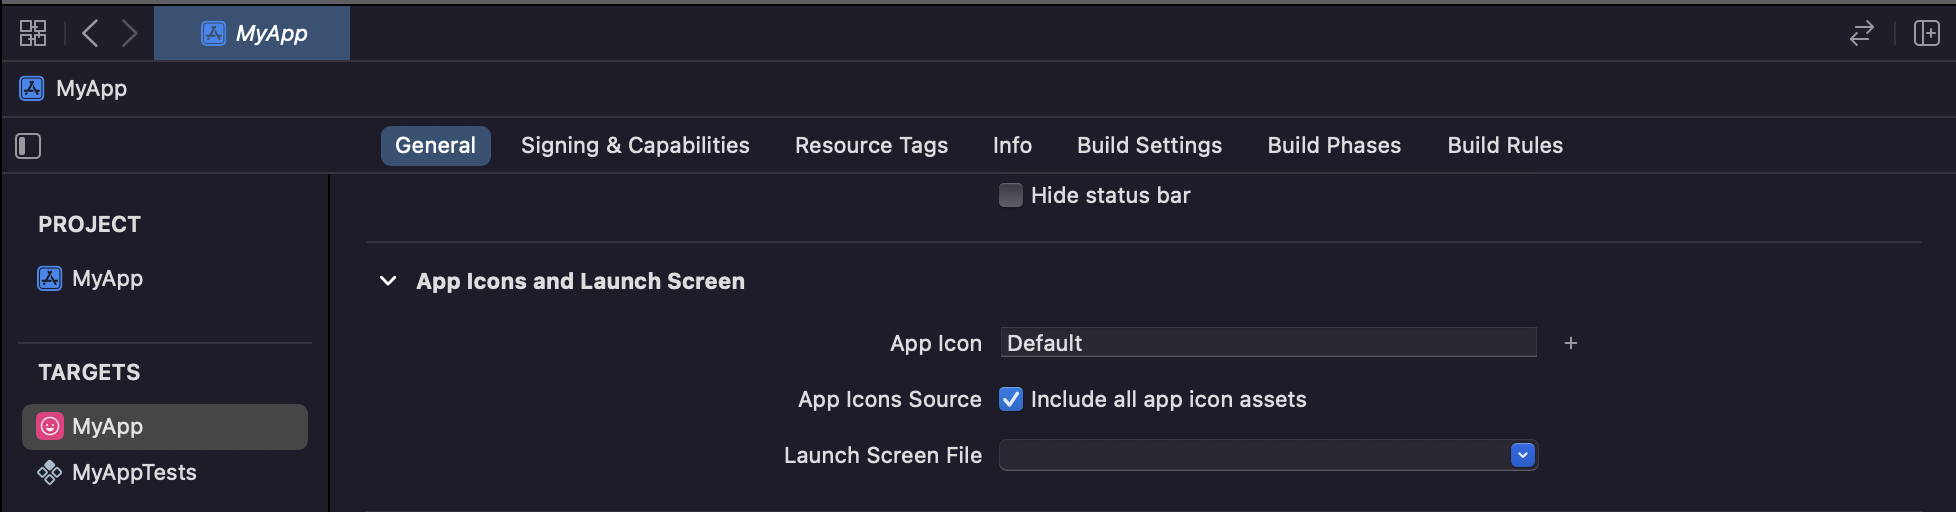 Example App Icons and Launch Screen